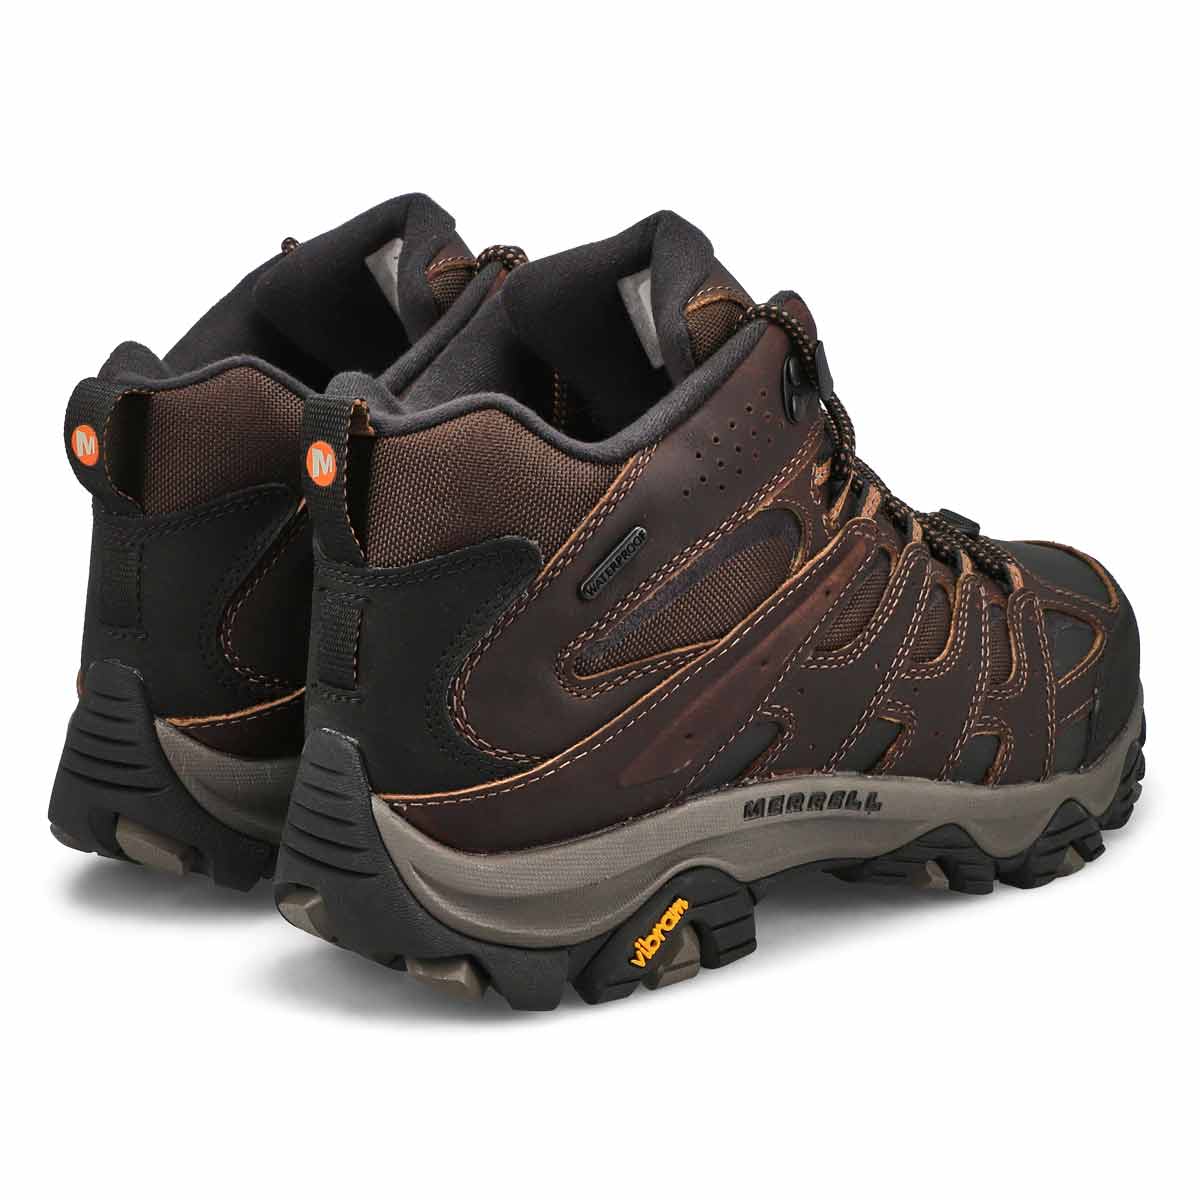 Men's Moab 3 Themo Waterproof Wide Hiking Boot - Earth